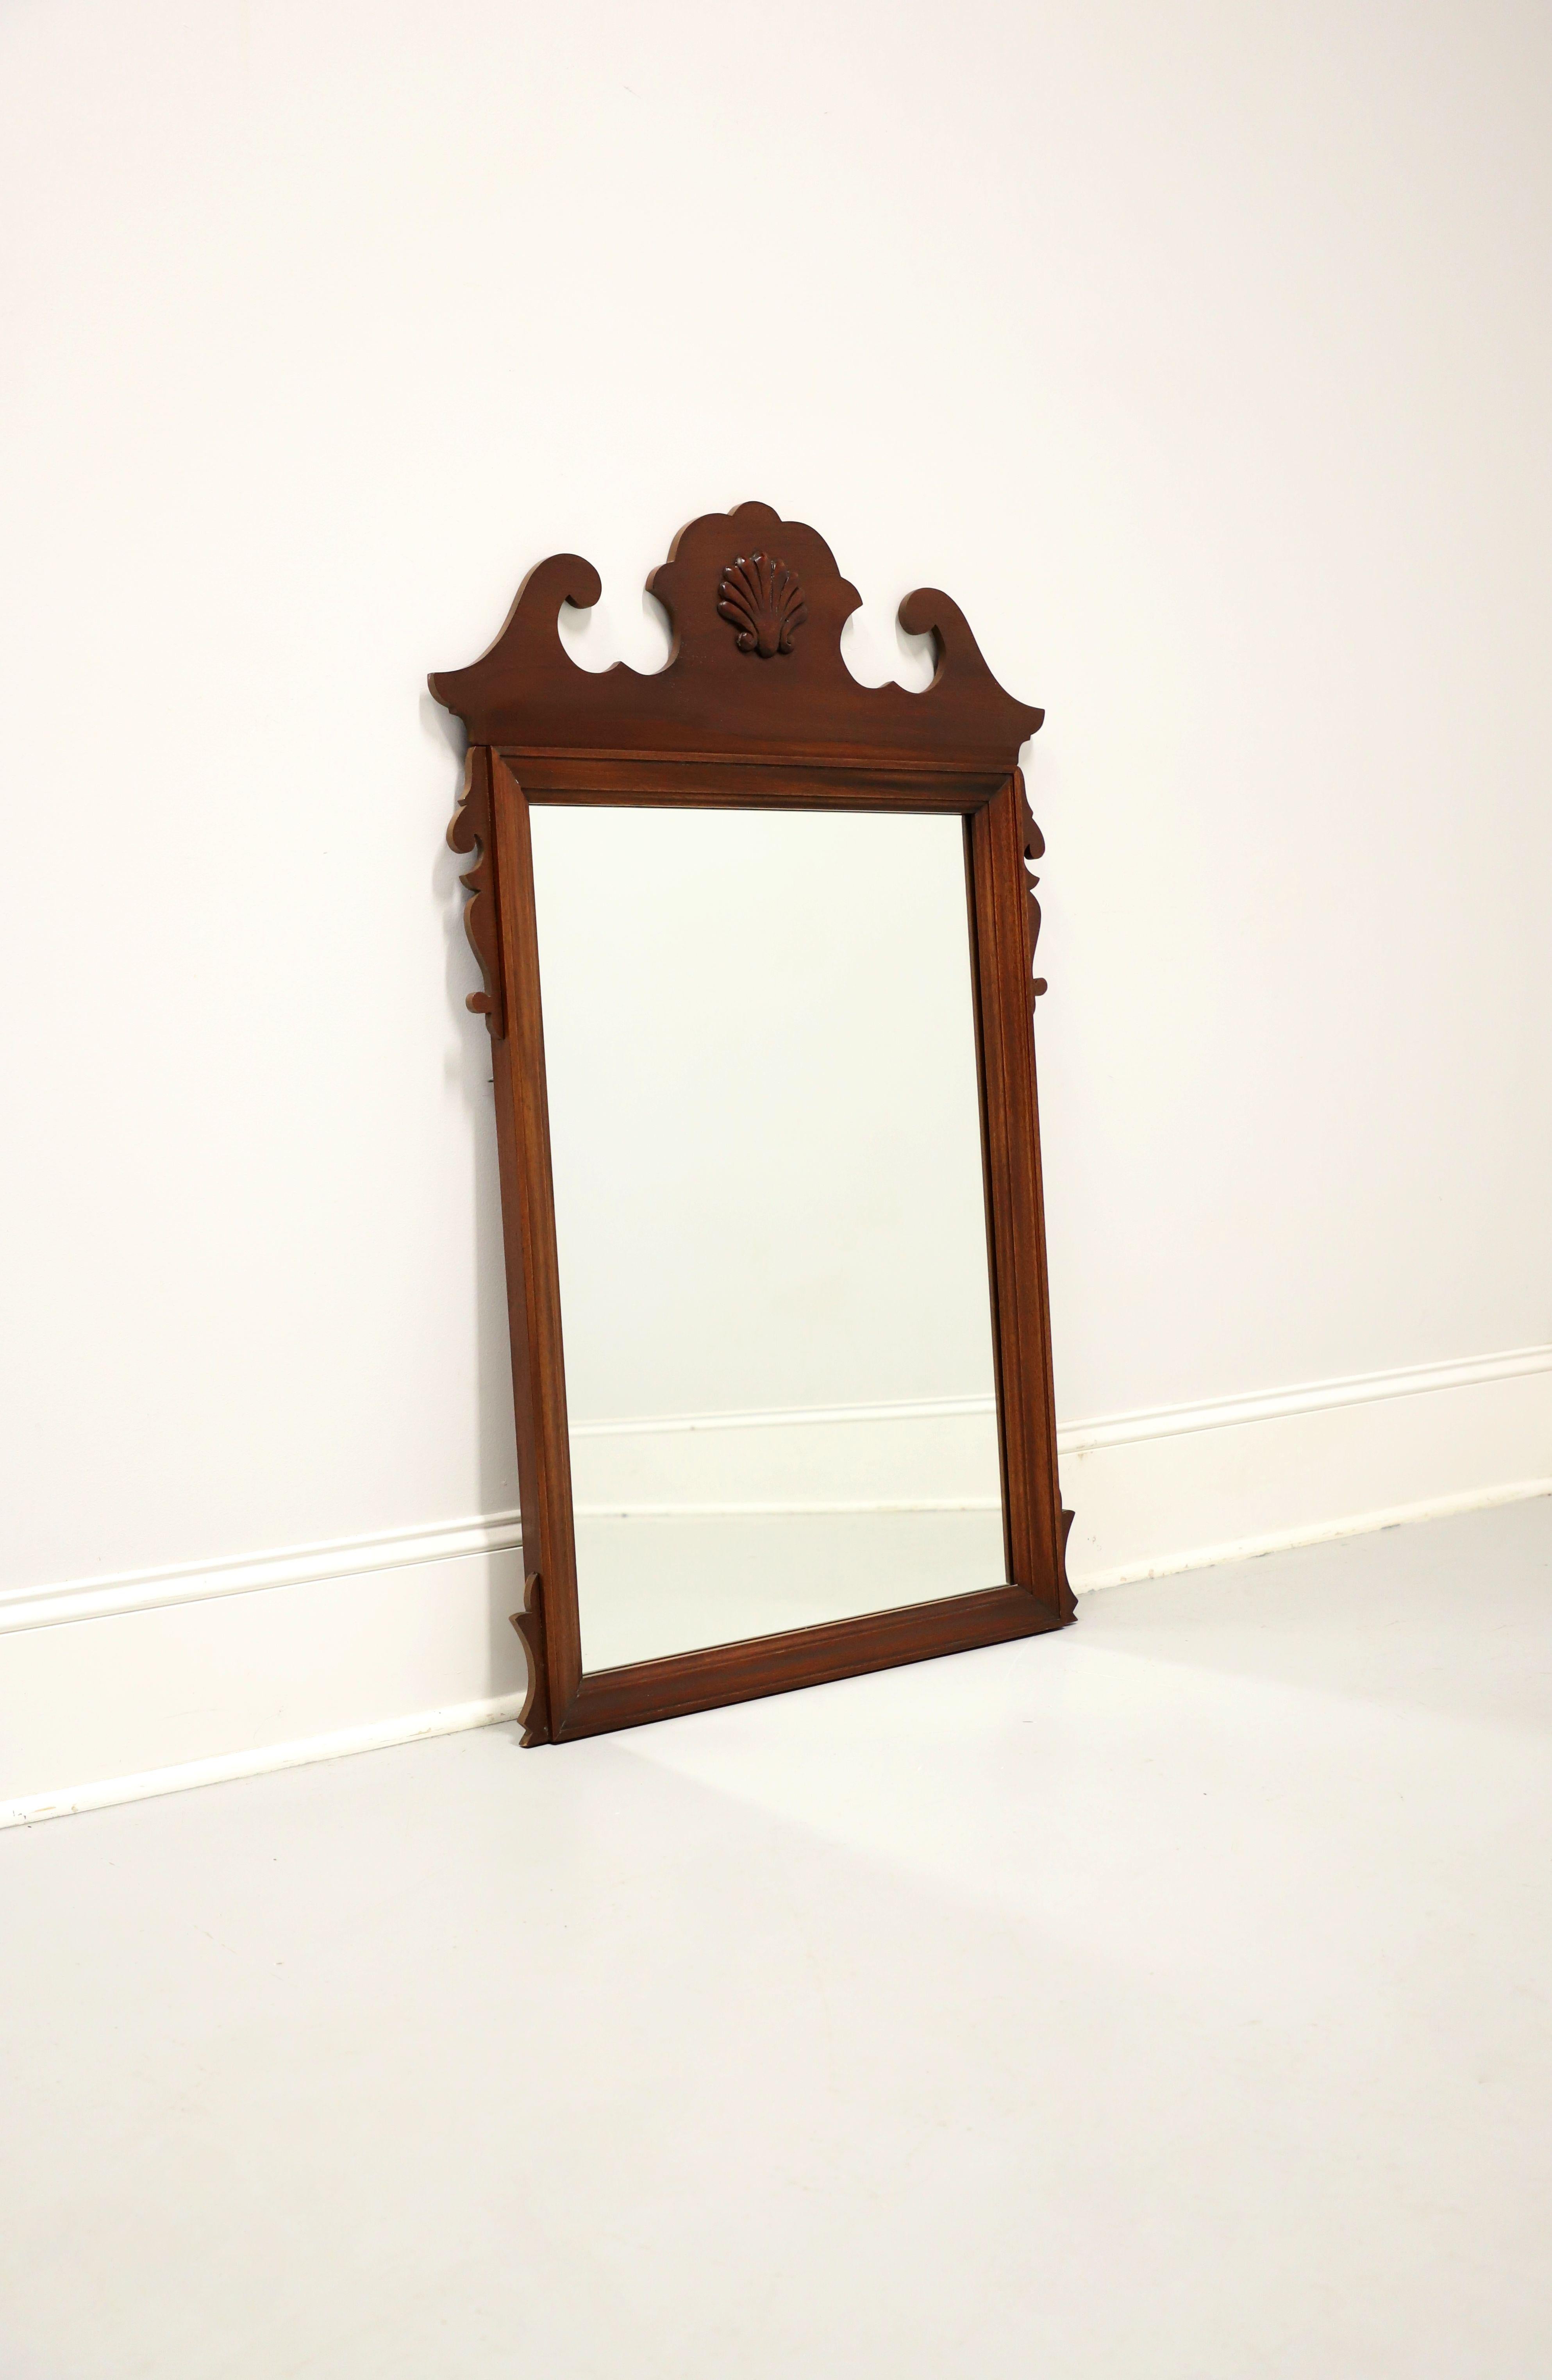 A Chippendale style wall or dresser mirror by Dixie Furniture. Mirrored glass in mahogany frame with decorative carving and to top center a shell shaped medallion. Made in Lenoir, North Carolina, USA, in the late 20th century.

Style #: